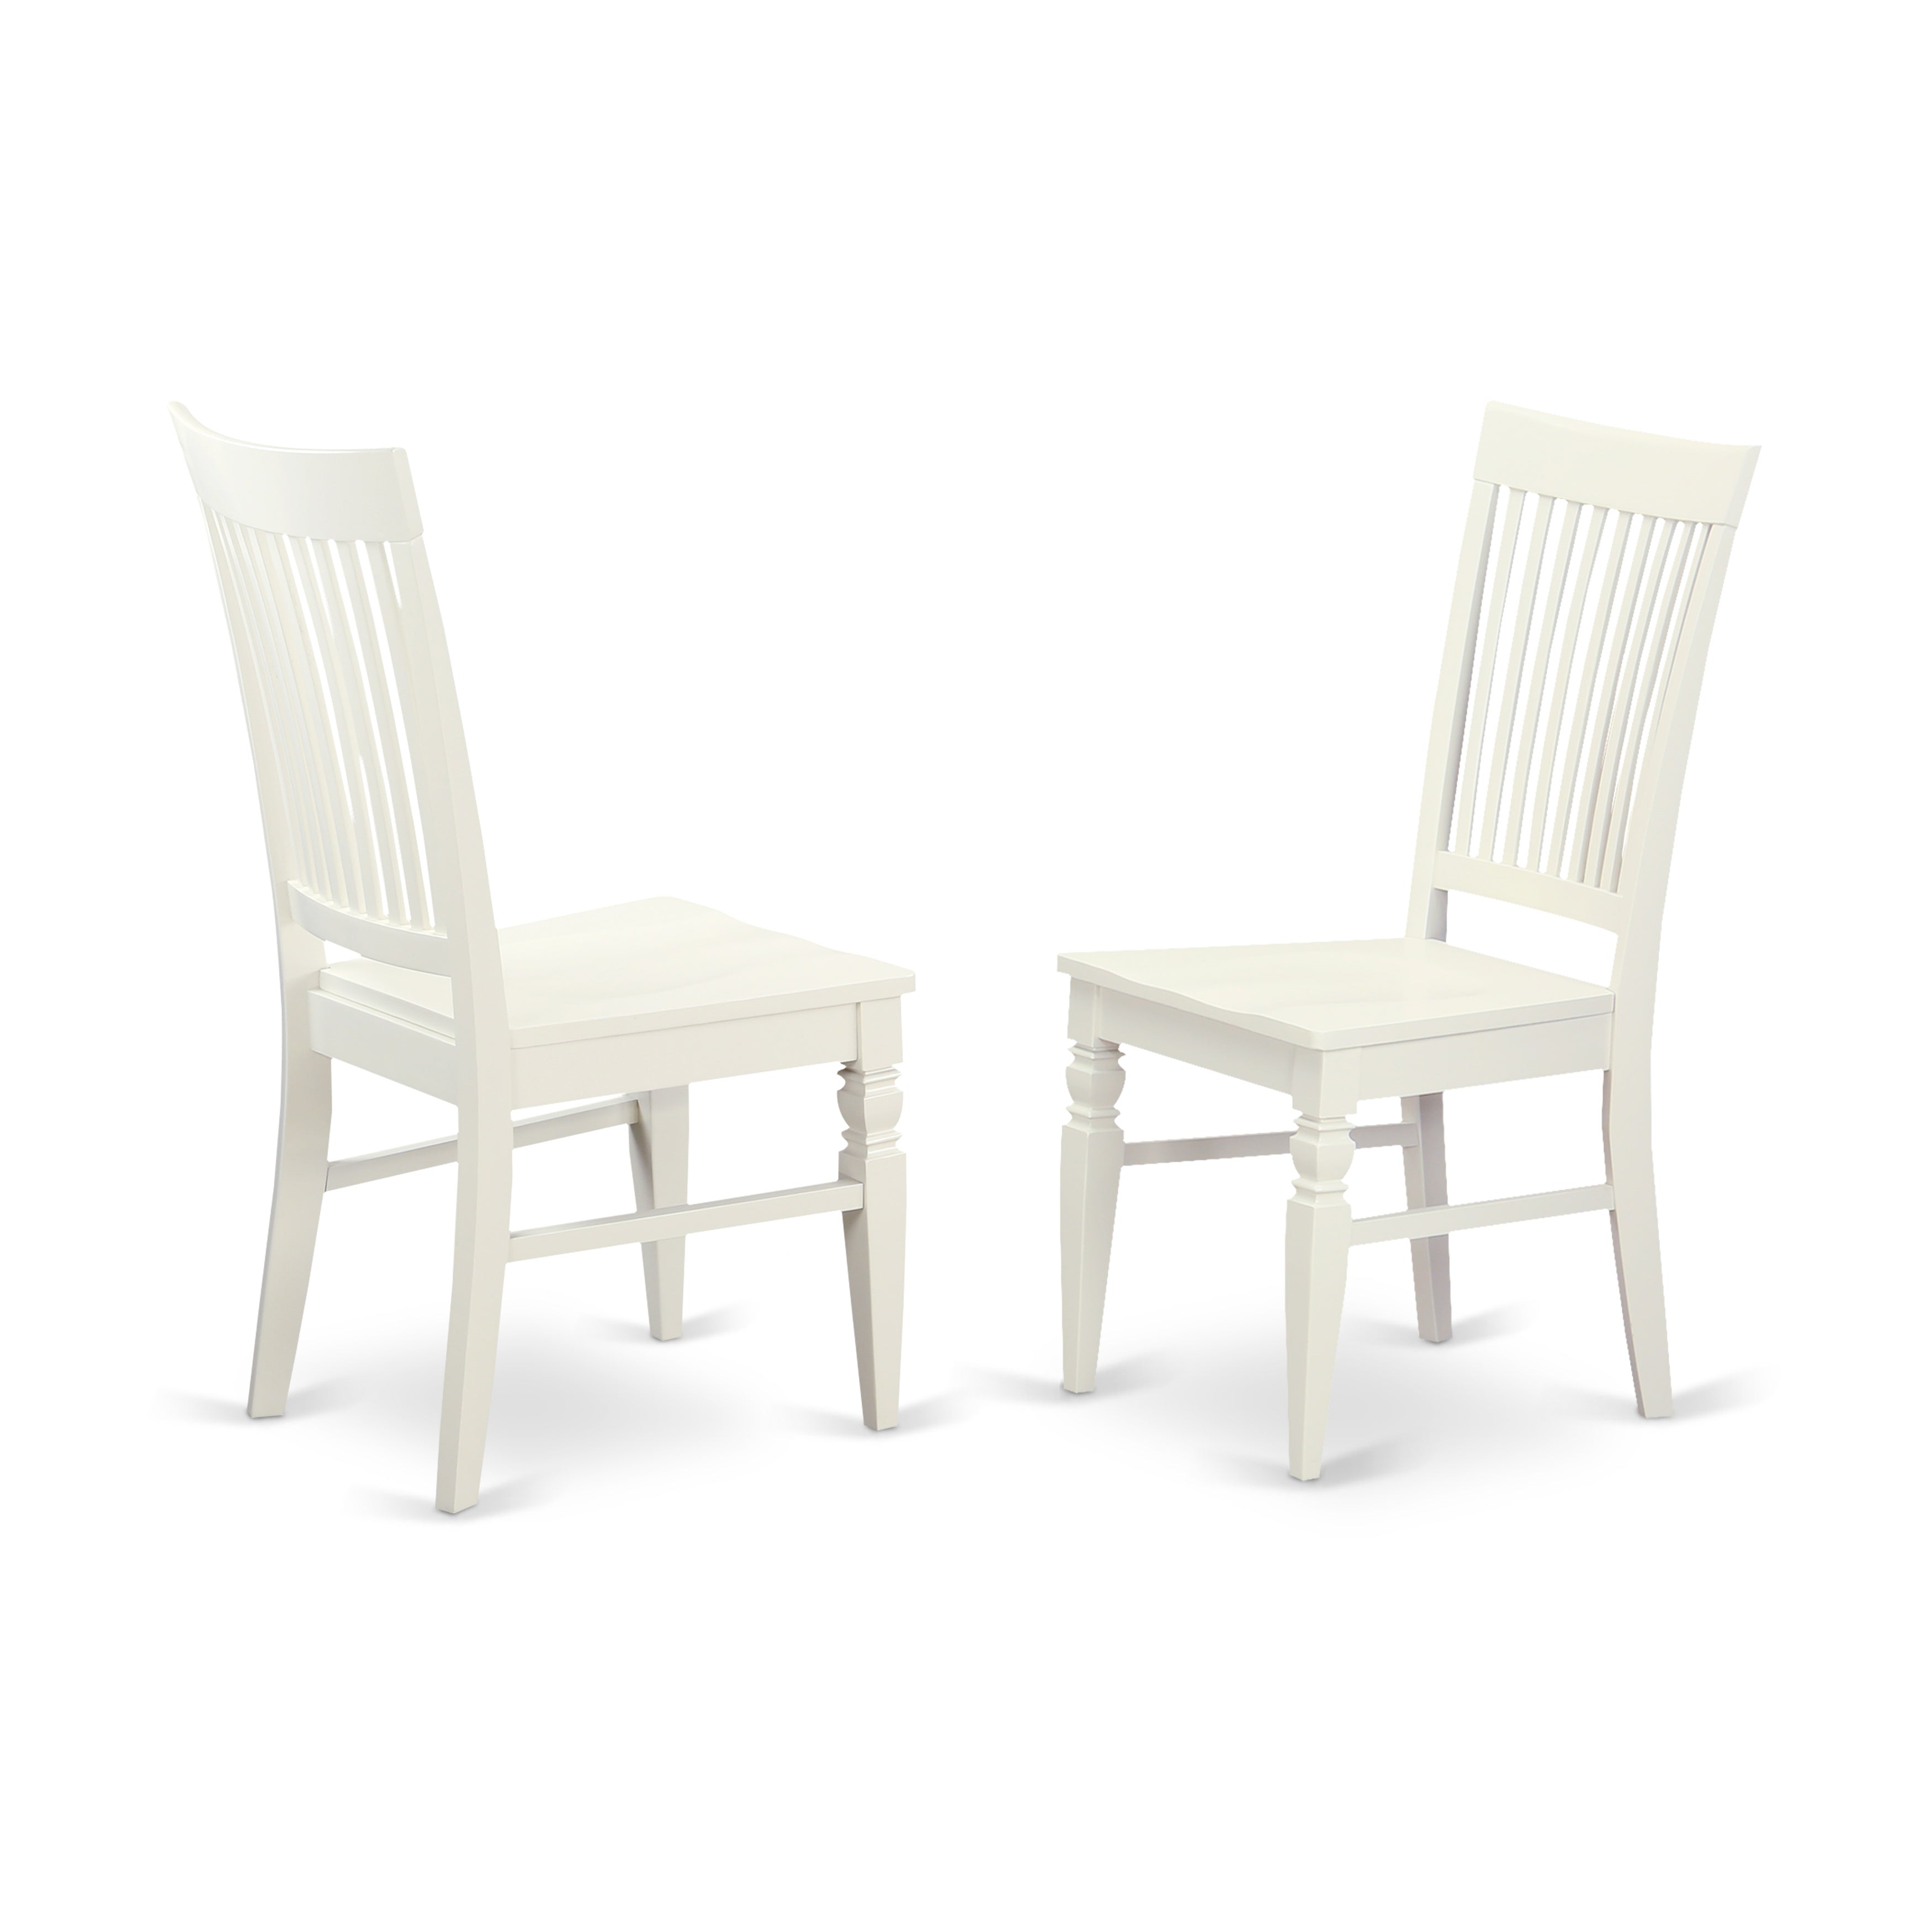 AVWE5-LWH-W 5 Pc Dining set with a Kitchen Table and 4 Wood Seat Kitchen Chairs in Linen White